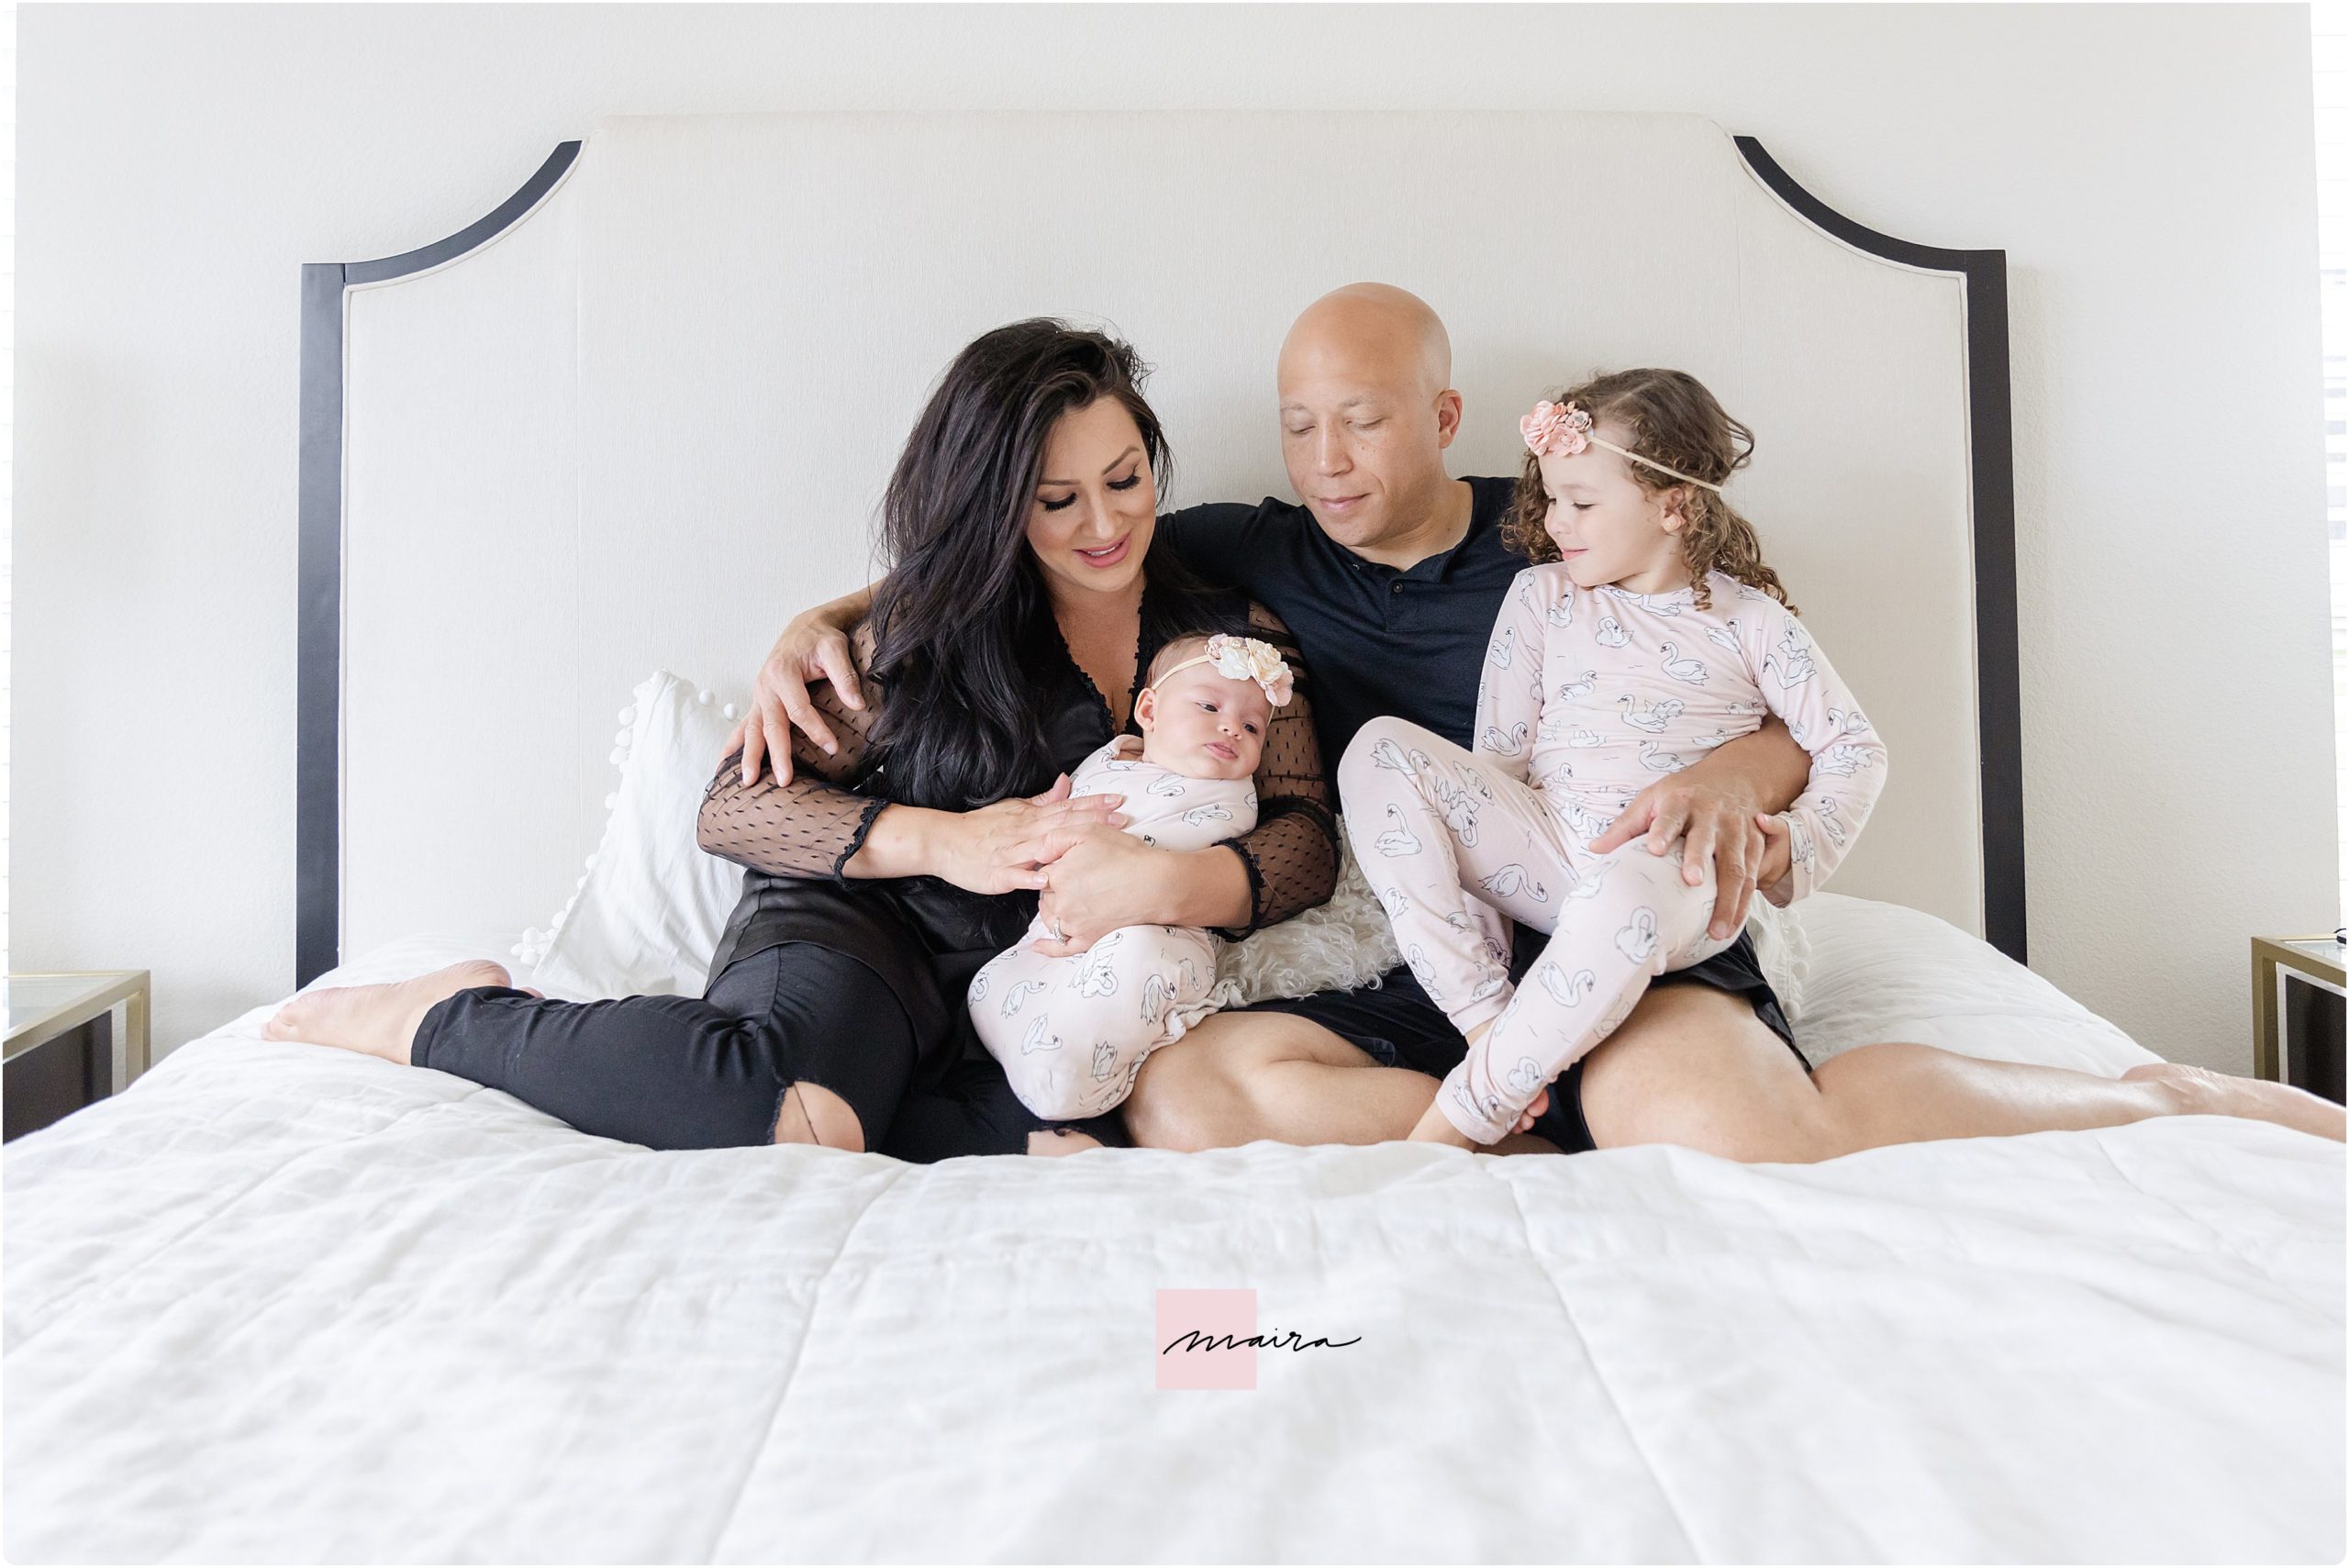 Lifestyle Family Newborn Session, Texas, Travel photography, baby photos, Home session, Mom and baby, Dad and baby, Big sister and little sister photos